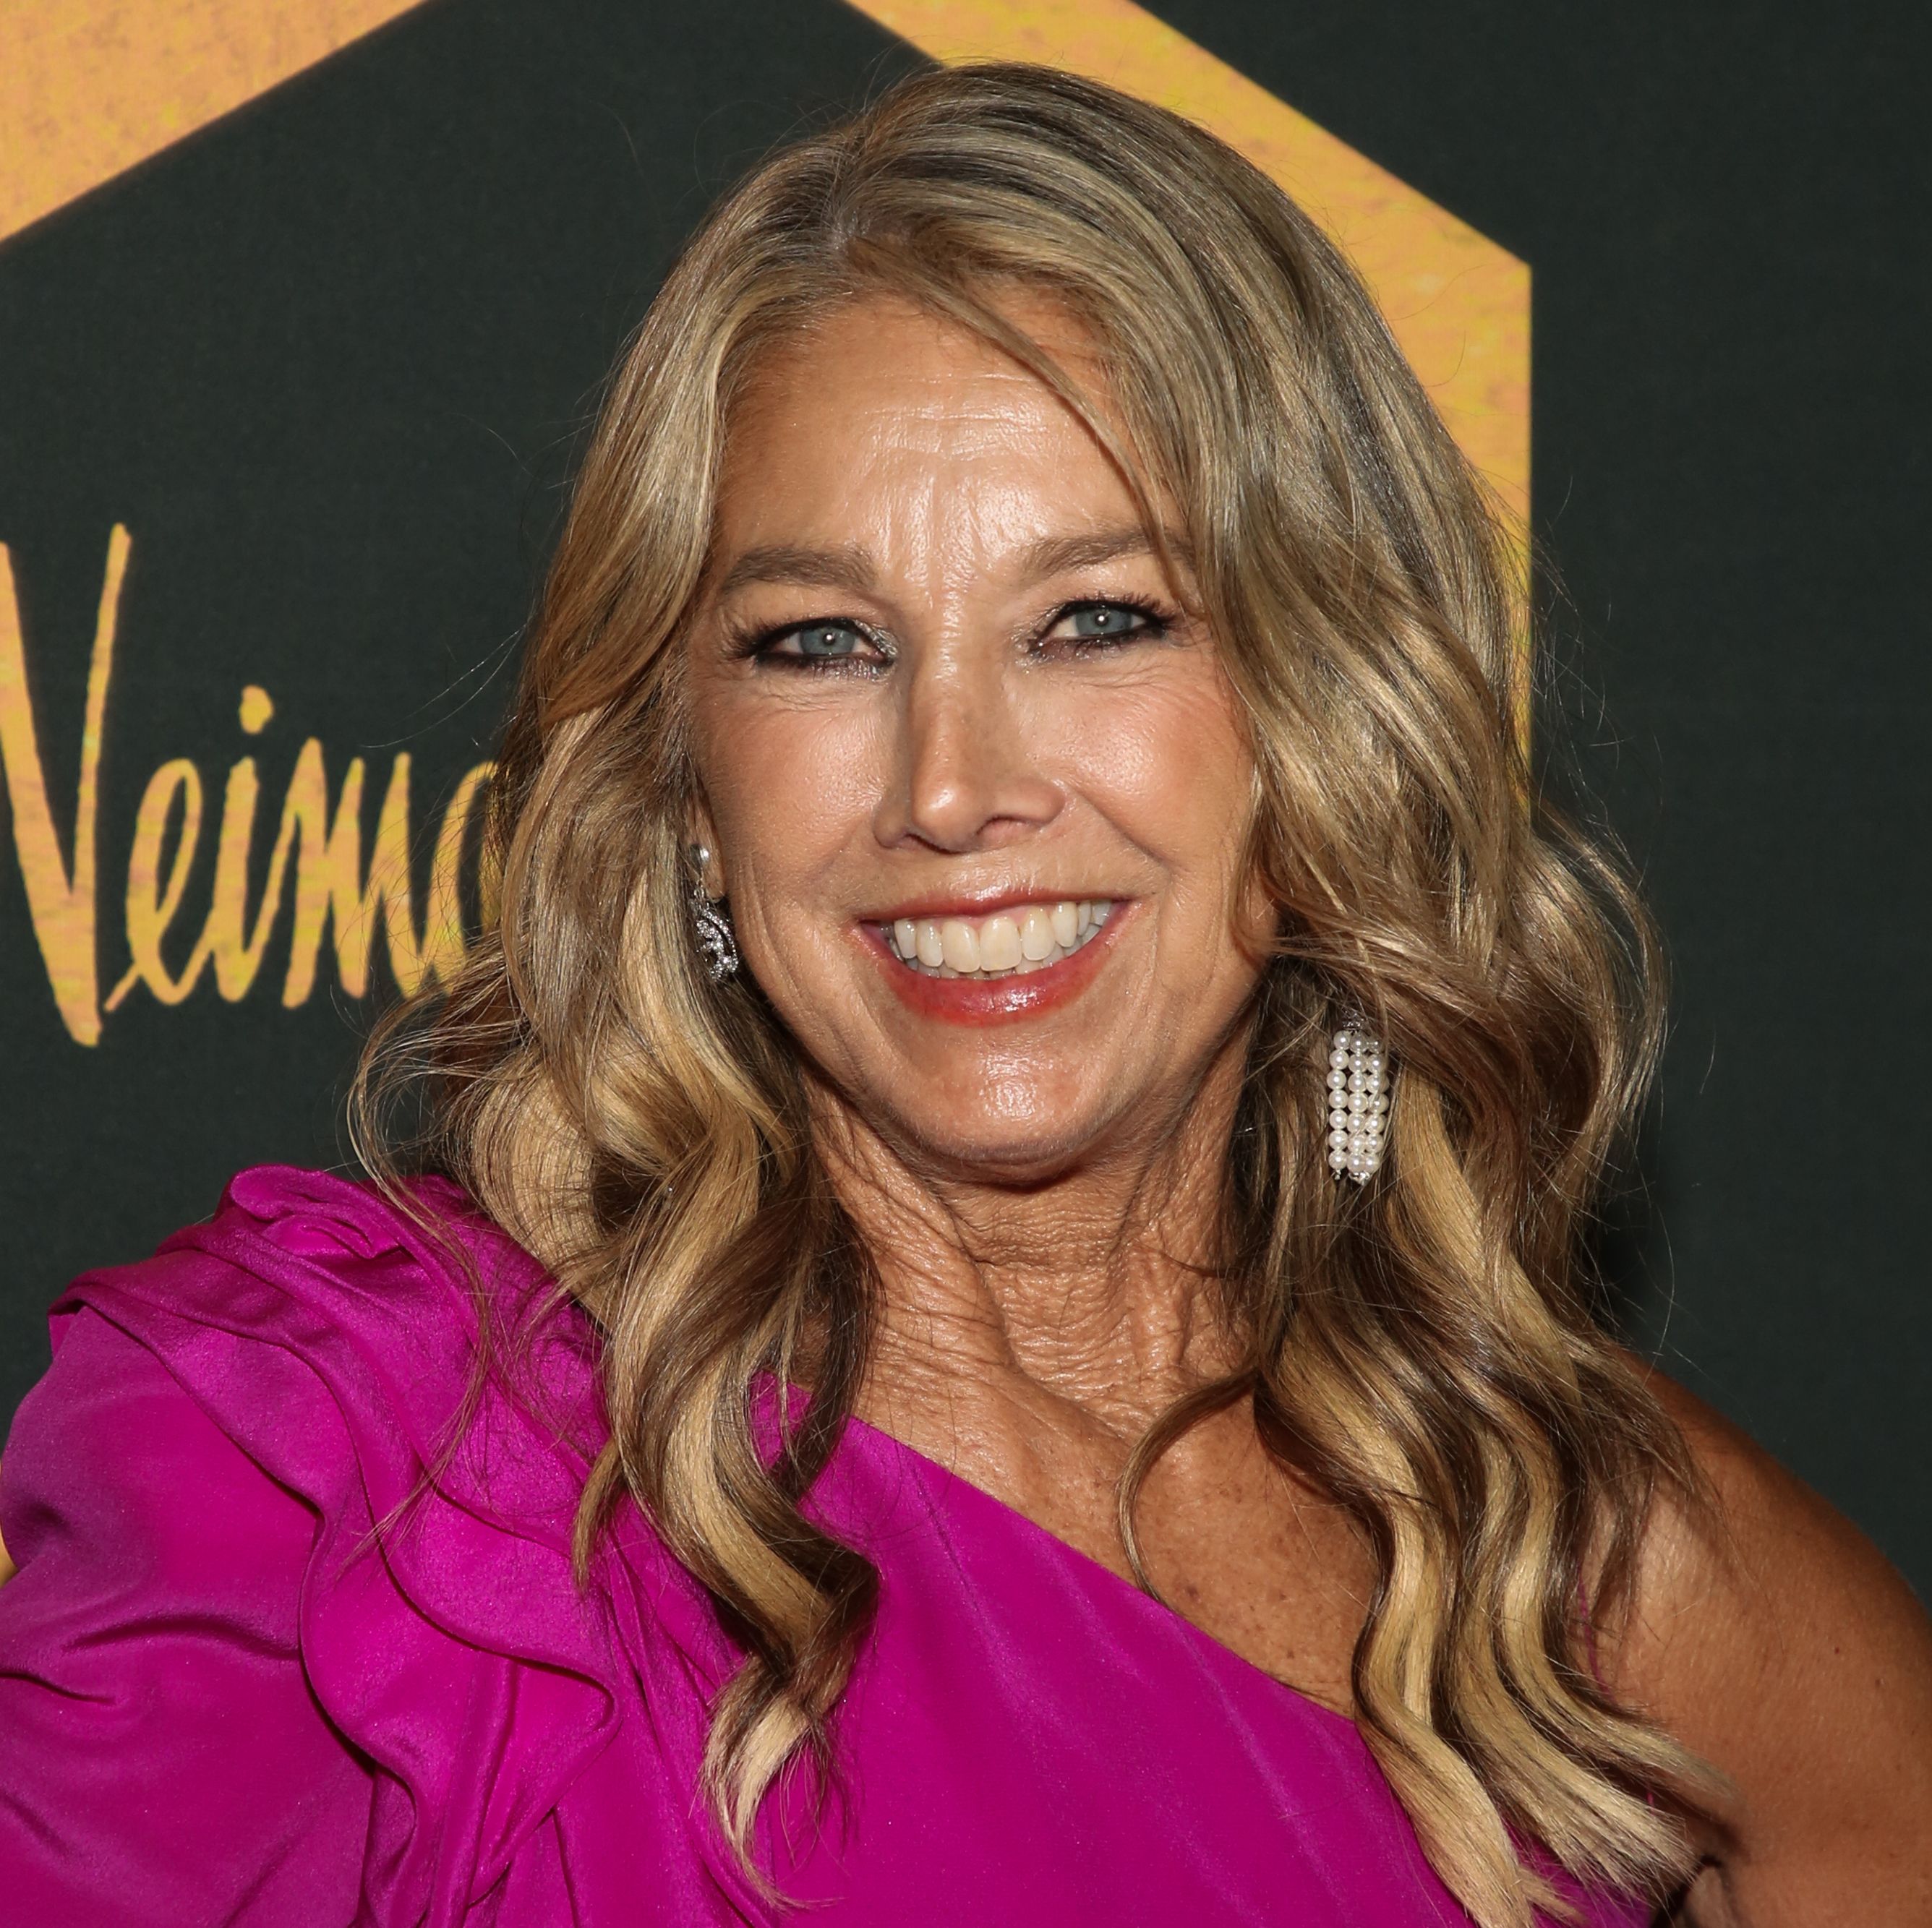 At 65, Denise Austin Is So Toned Performing '3 Easy' Exercises for Women 'Over 50'